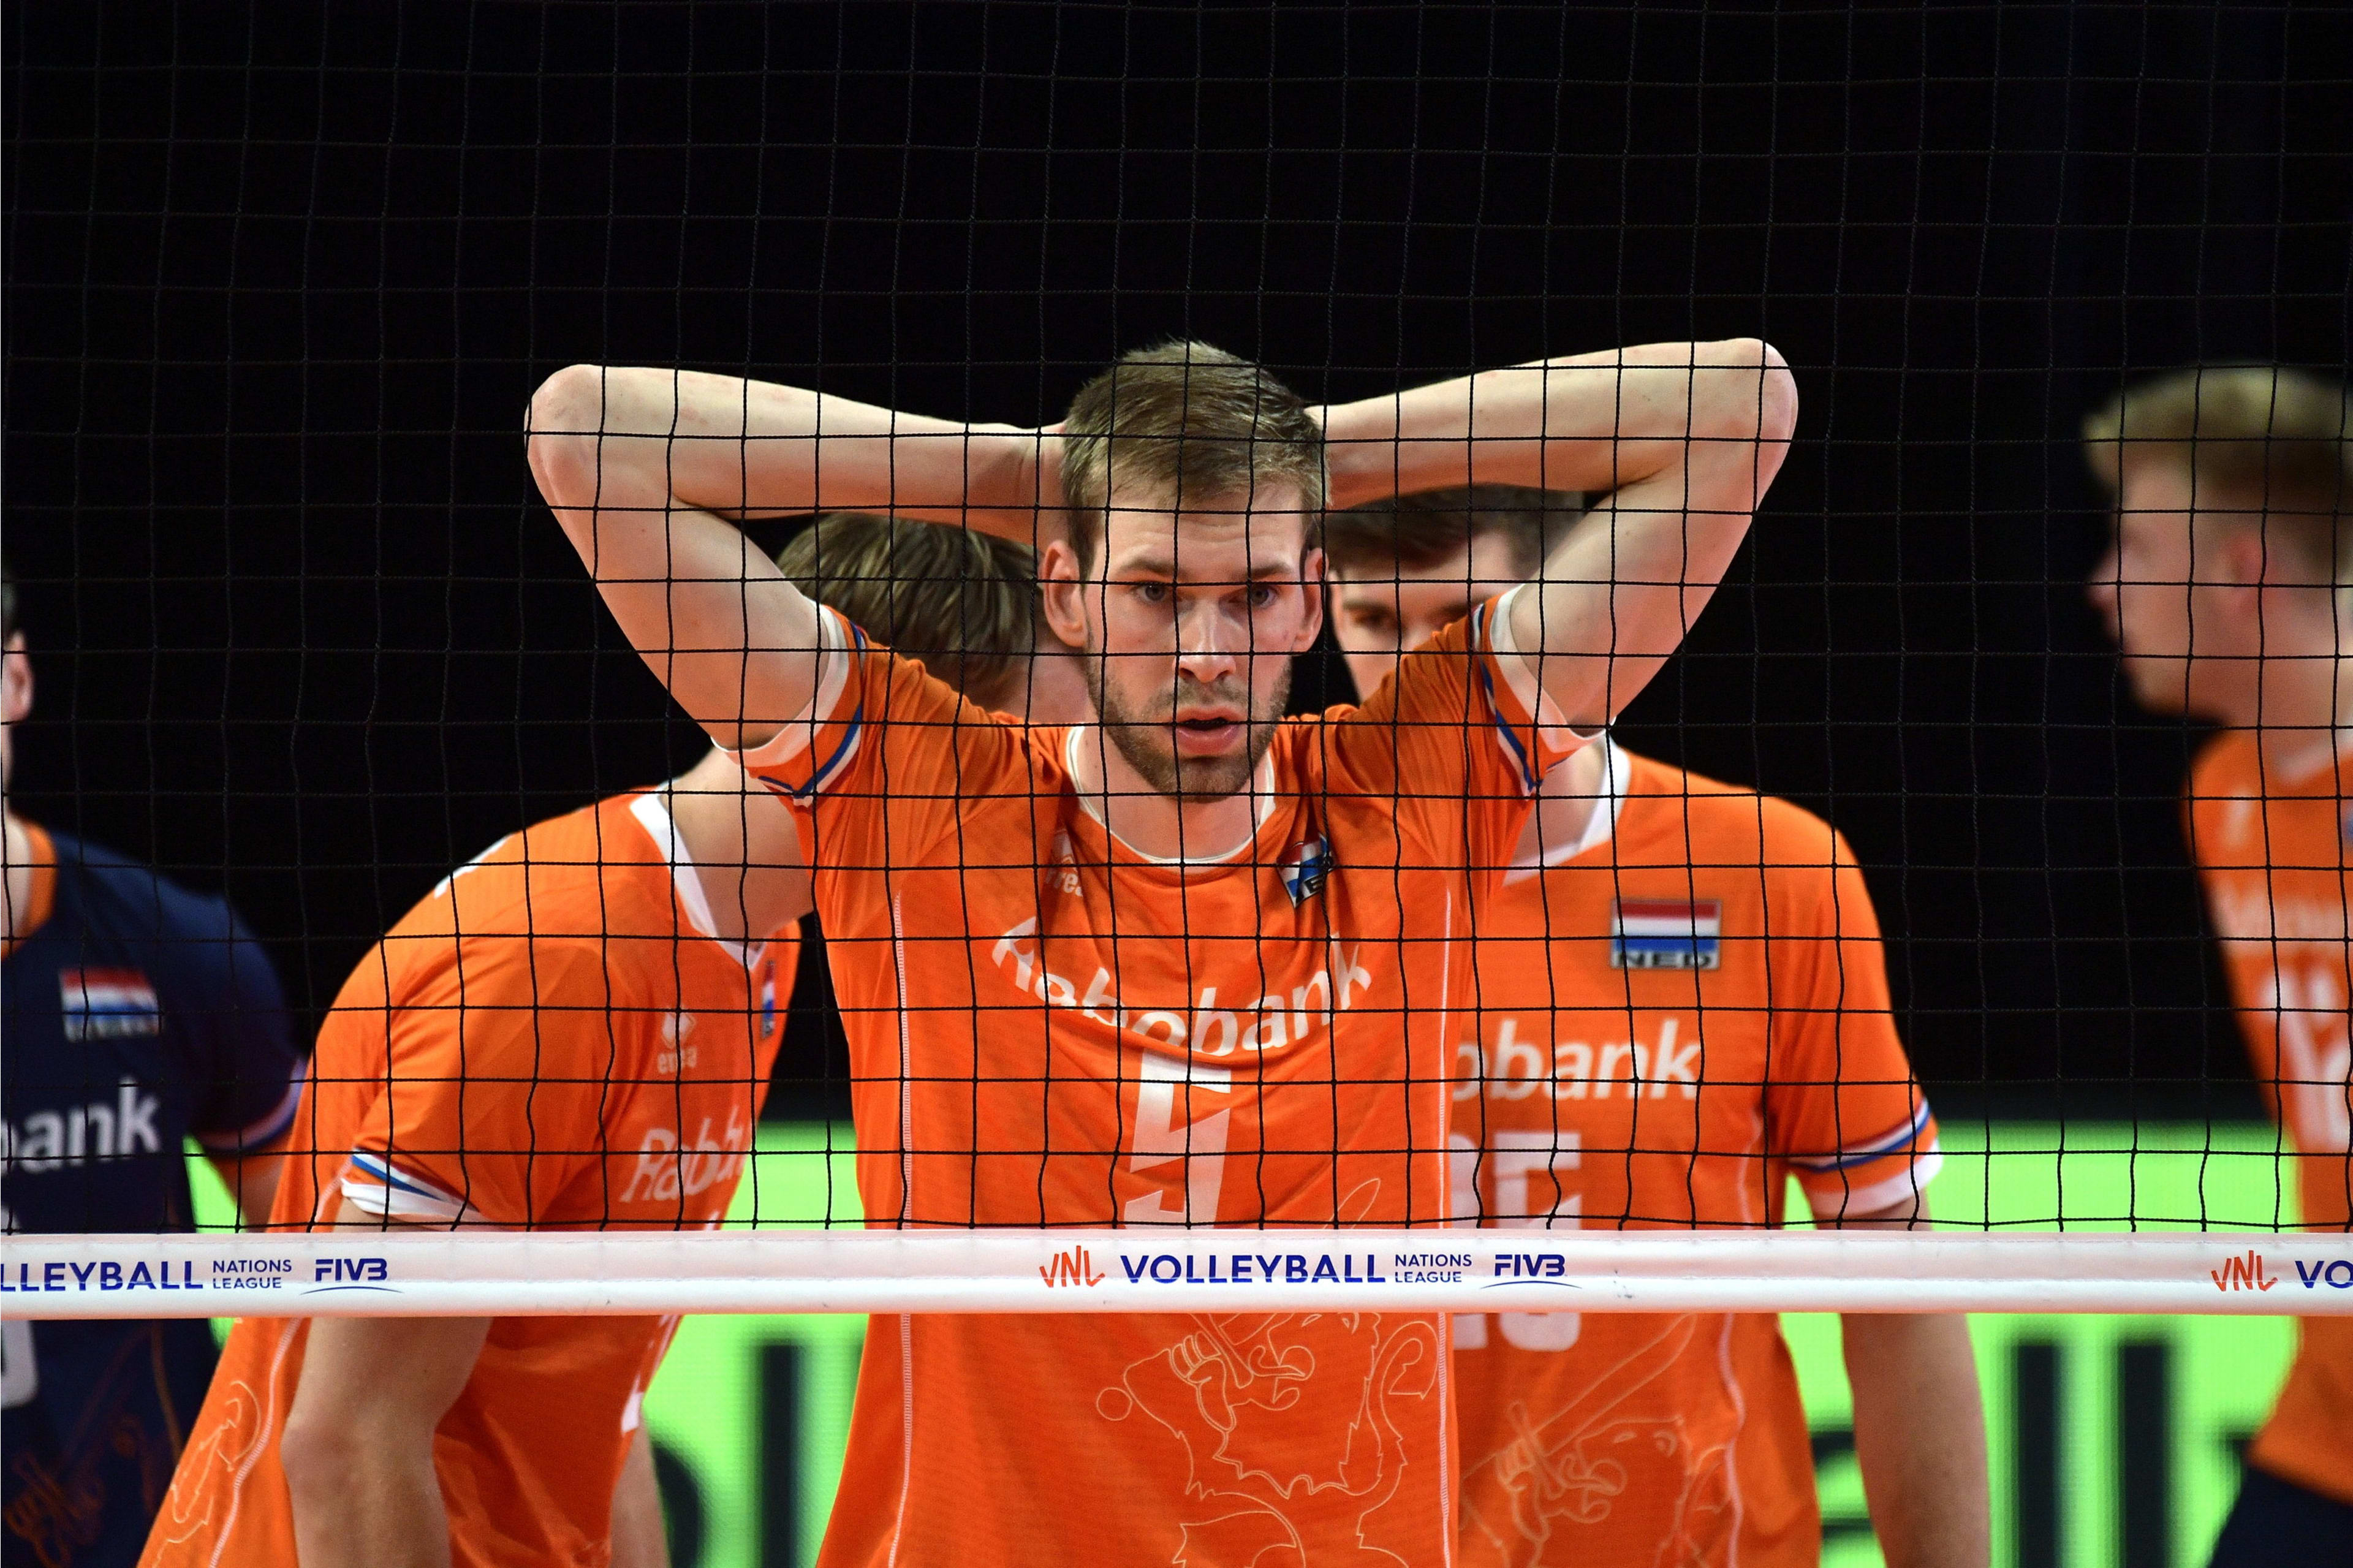 Official FIVB Volleyball Signed By The Netherlands National